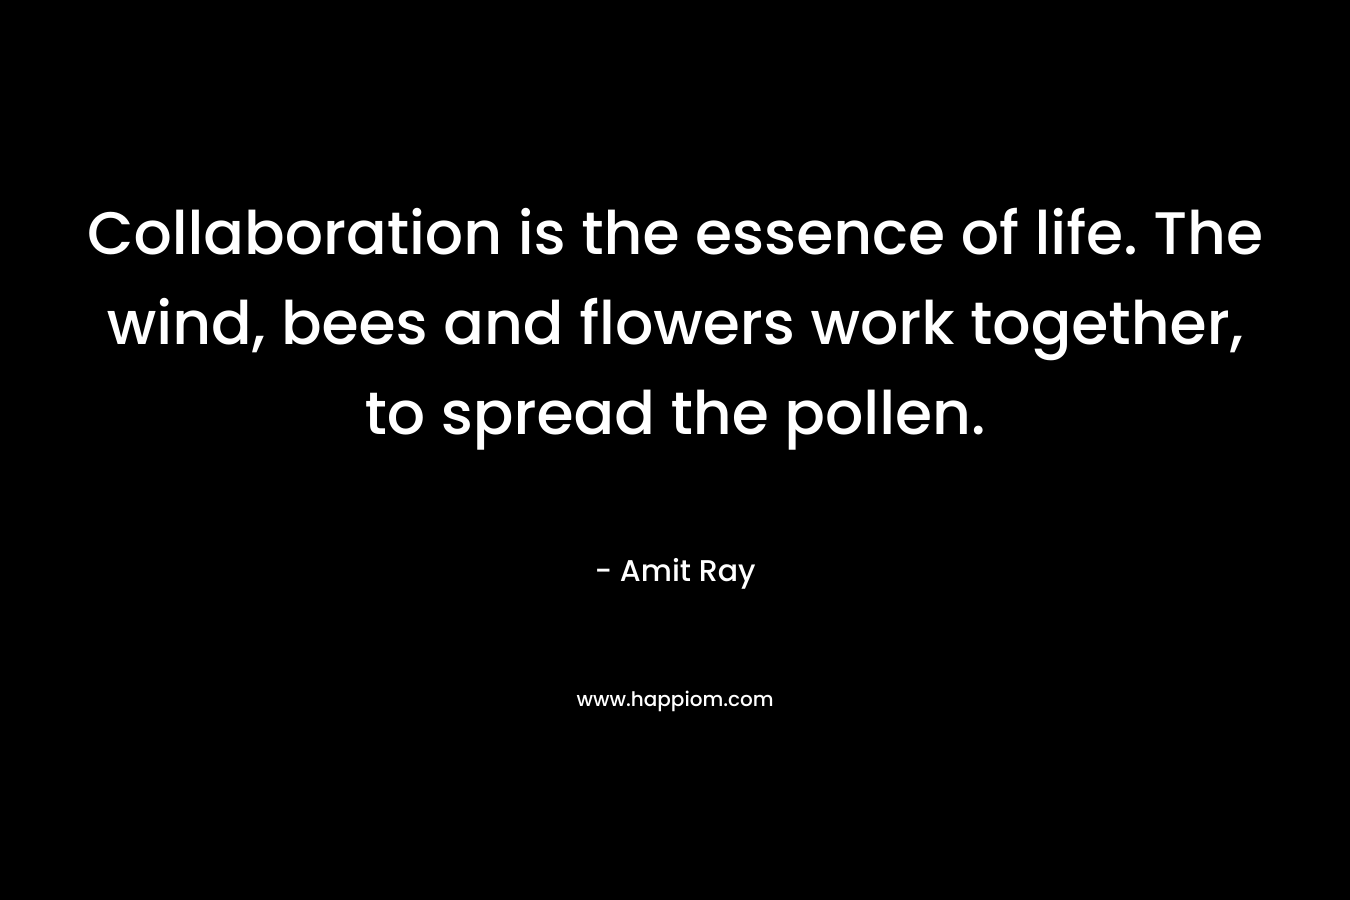 Collaboration is the essence of life. The wind, bees and flowers work together, to spread the pollen.